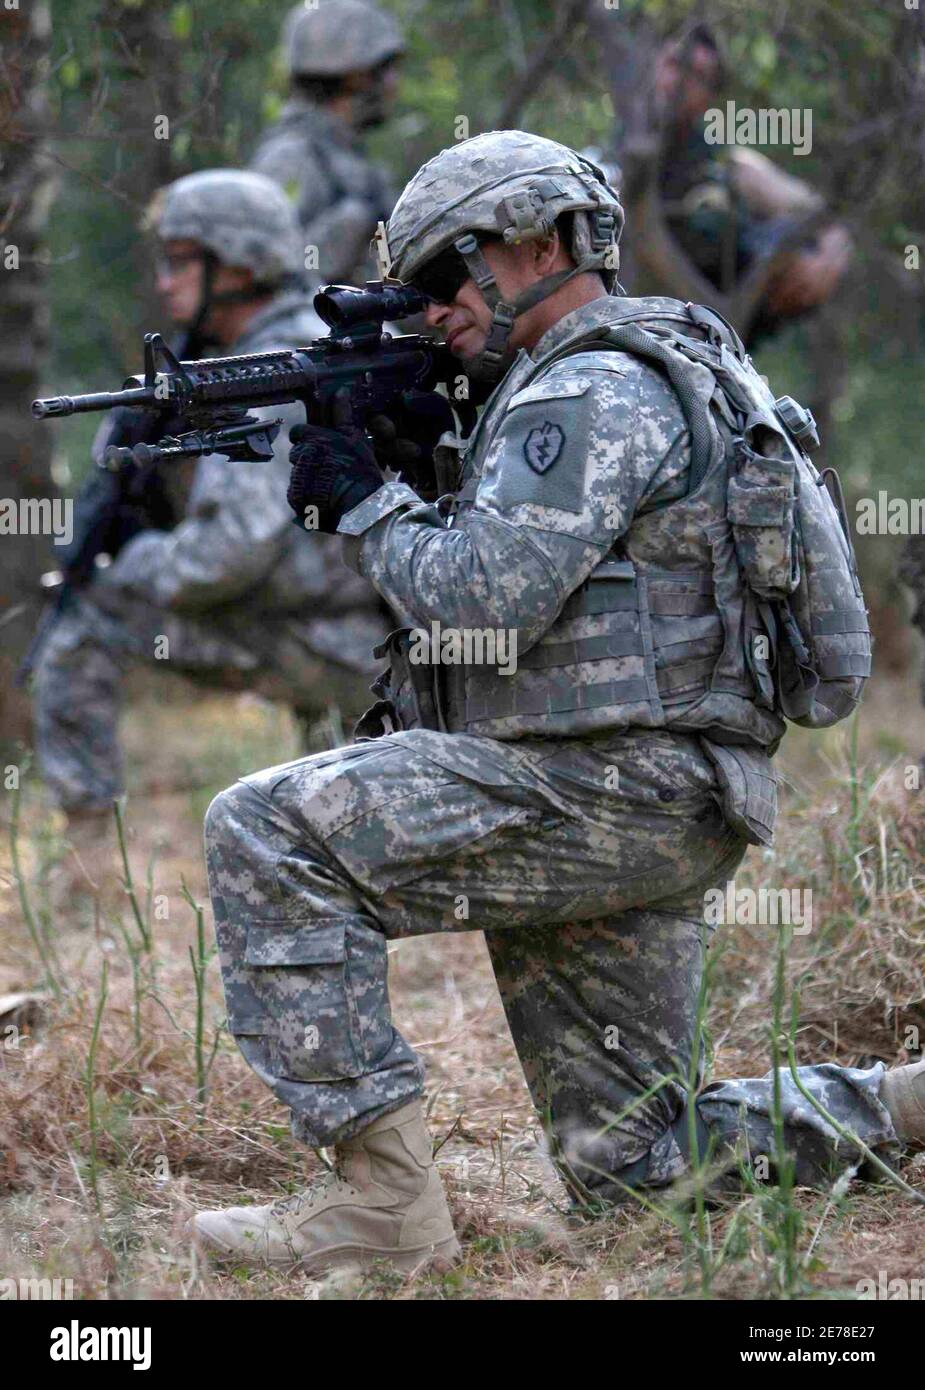 U.S. soldiers take up position during a joint  search operation with Iraqi security forces in Saadia area near Baquba, 115 km (70 miles) northeast of Baghdad May 19, 2009.   REUTERS/Saad Shalash (IRAQ MILITARY POLITICS) Stock Photo